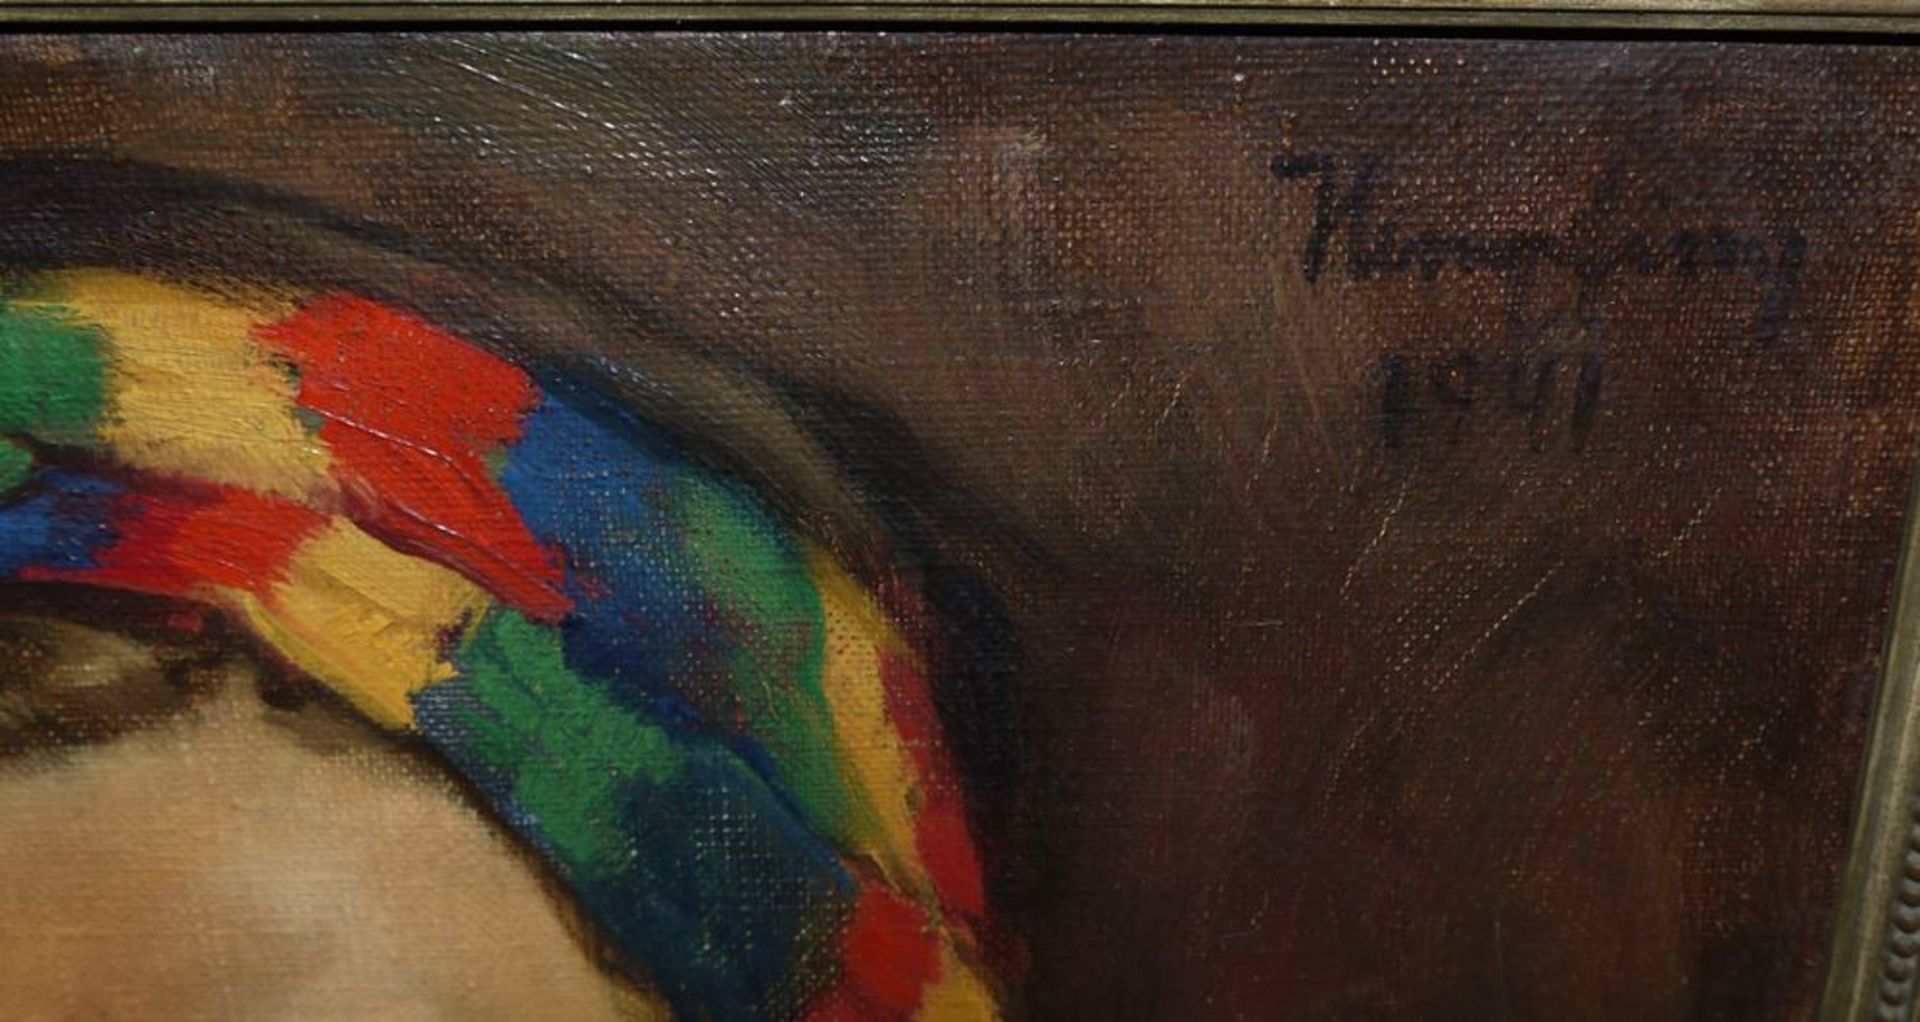 Wilhelm Hempfing, Portrait of a Beautiful Woman with a Colourful Hair Scarf, oil painting from 1941 - Image 3 of 4